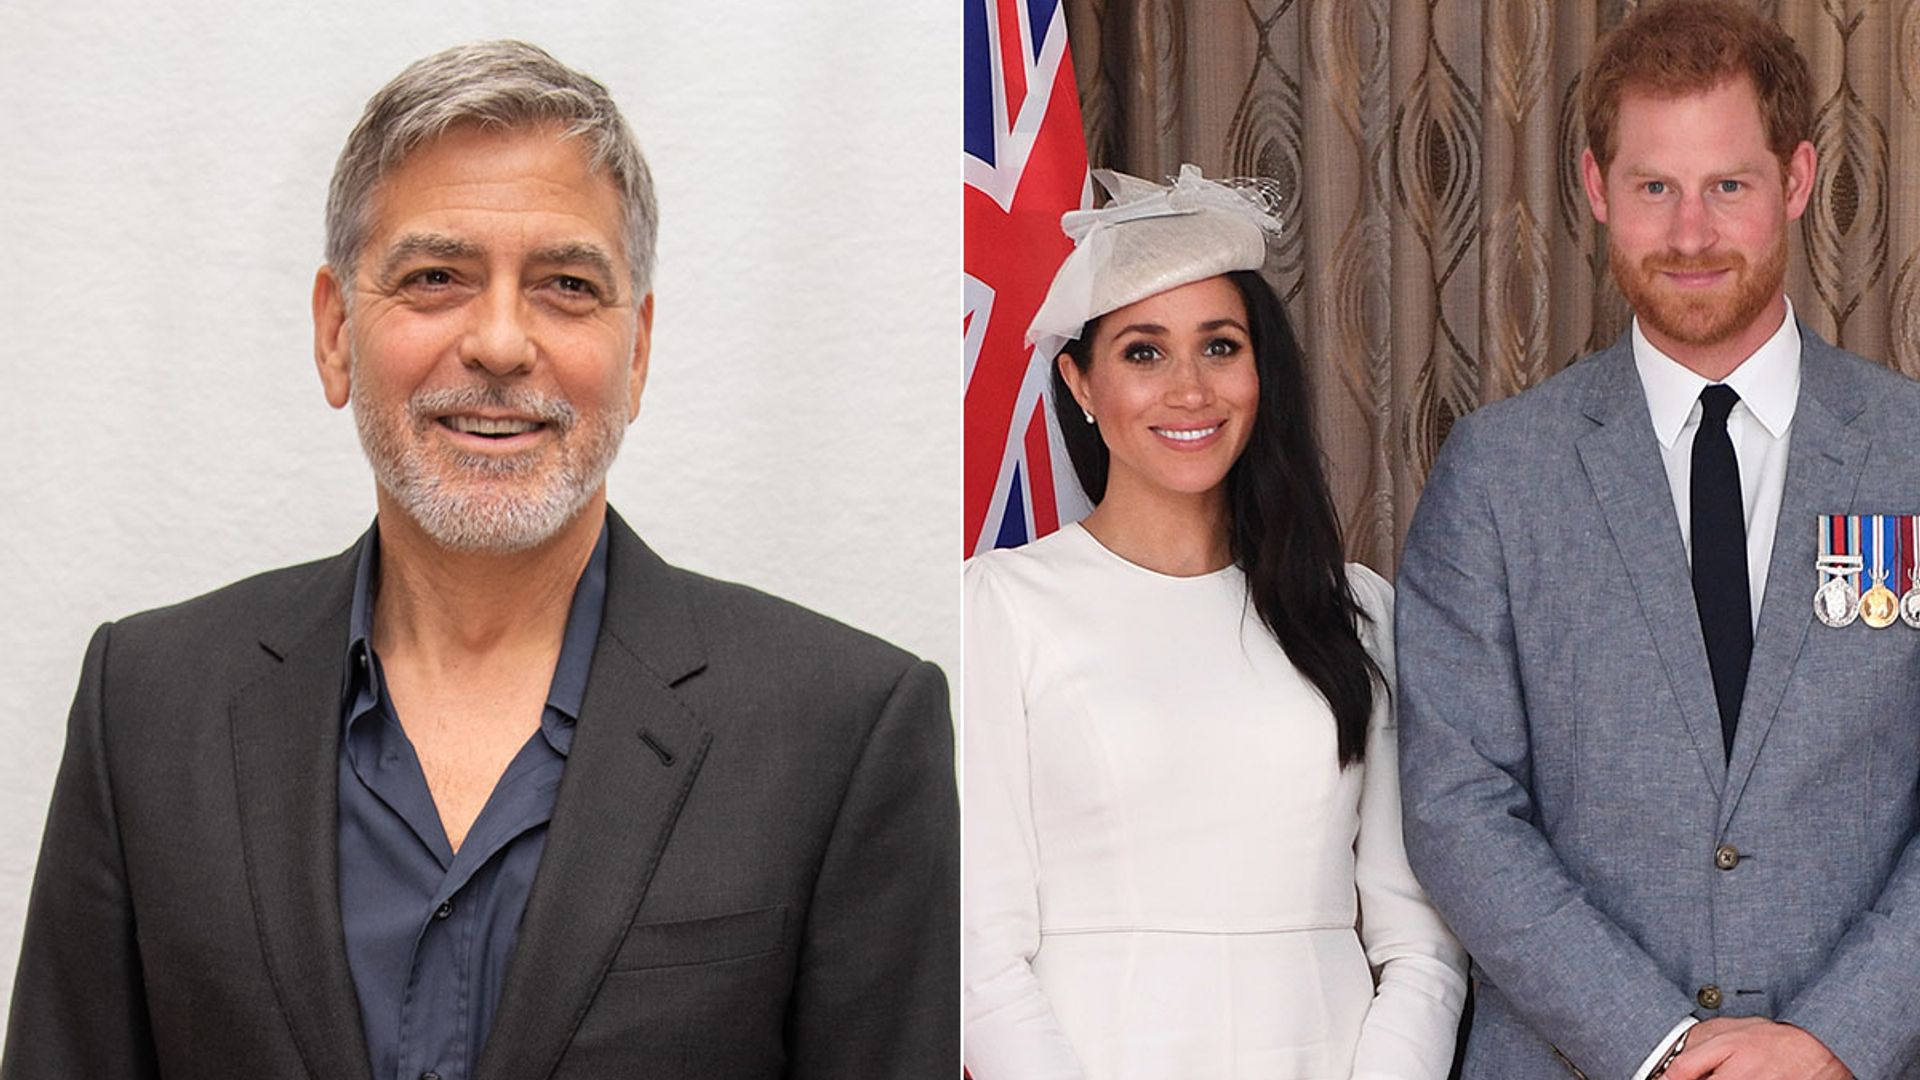 George Clooney reveals what he really thinks about sharing his birthday with Baby Sussex